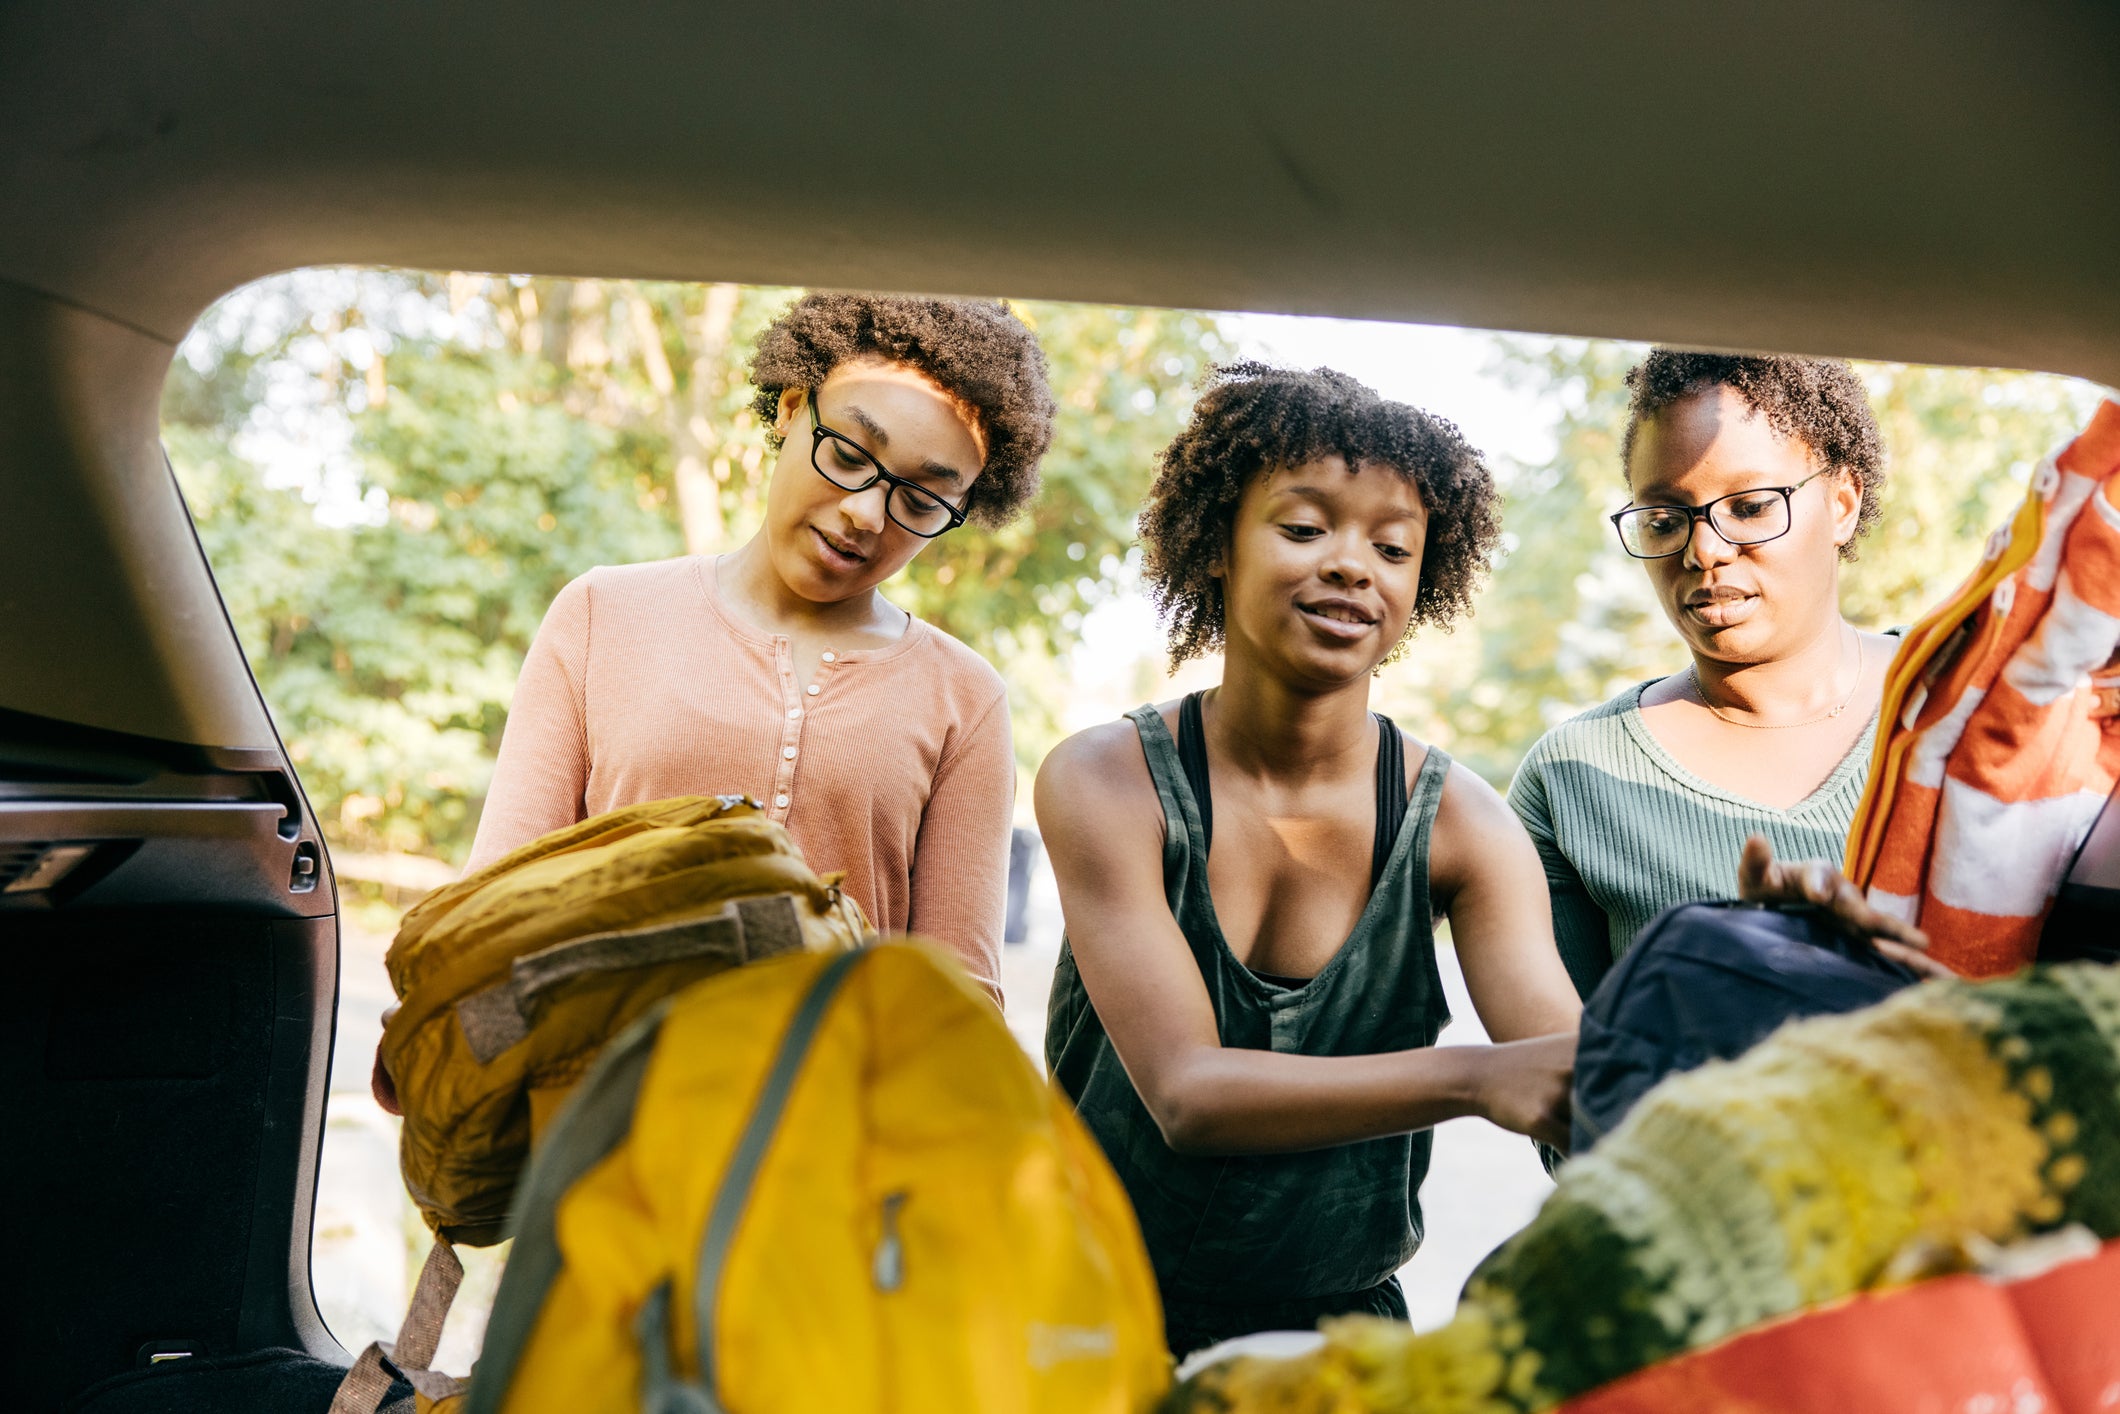 4 Tips for Planning Your Next Girls Trip: An Outdoor Adventure